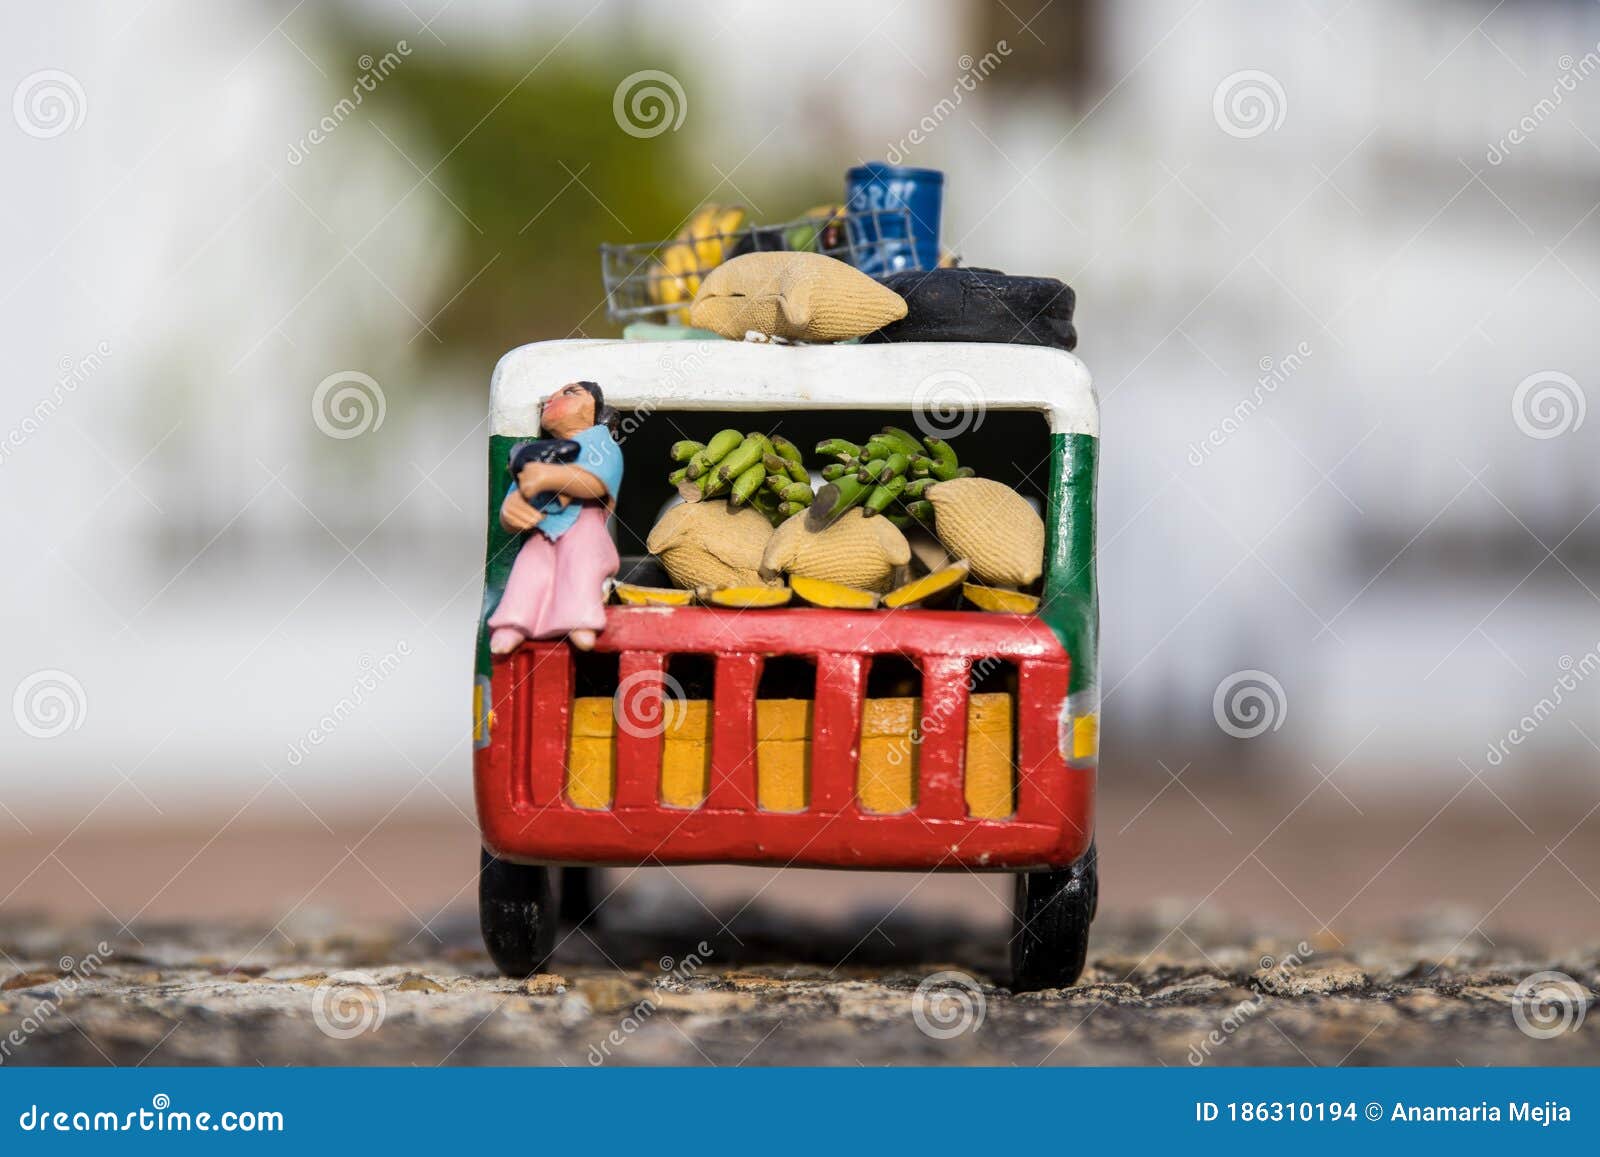 colorful traditional rural bus from colombia called chiva